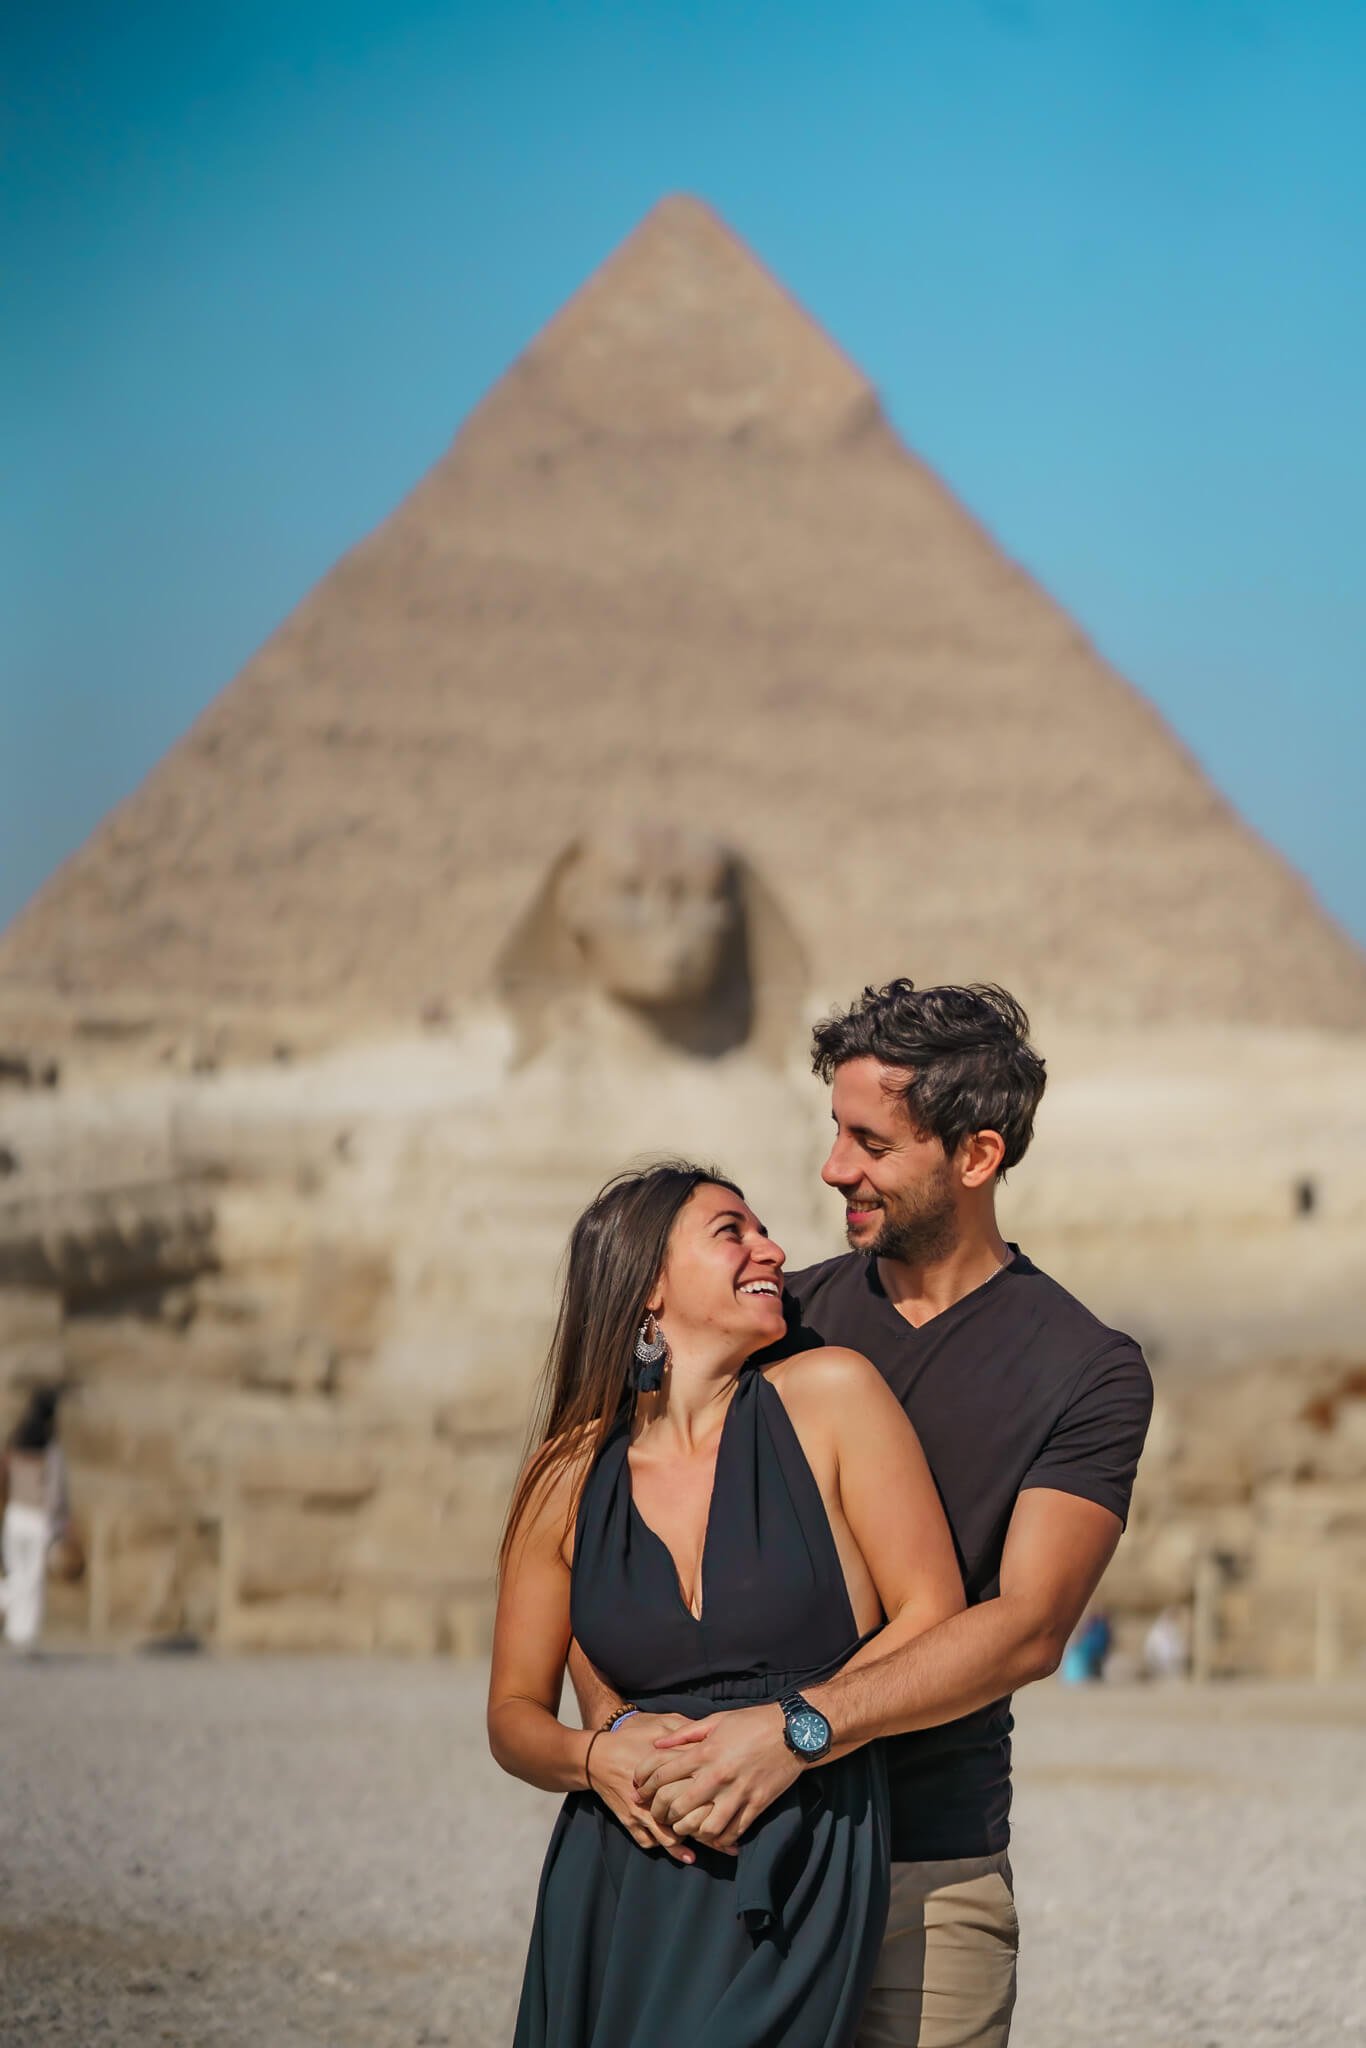 Danni and Fede, spots for the best photos at the Egyptian Pyramids